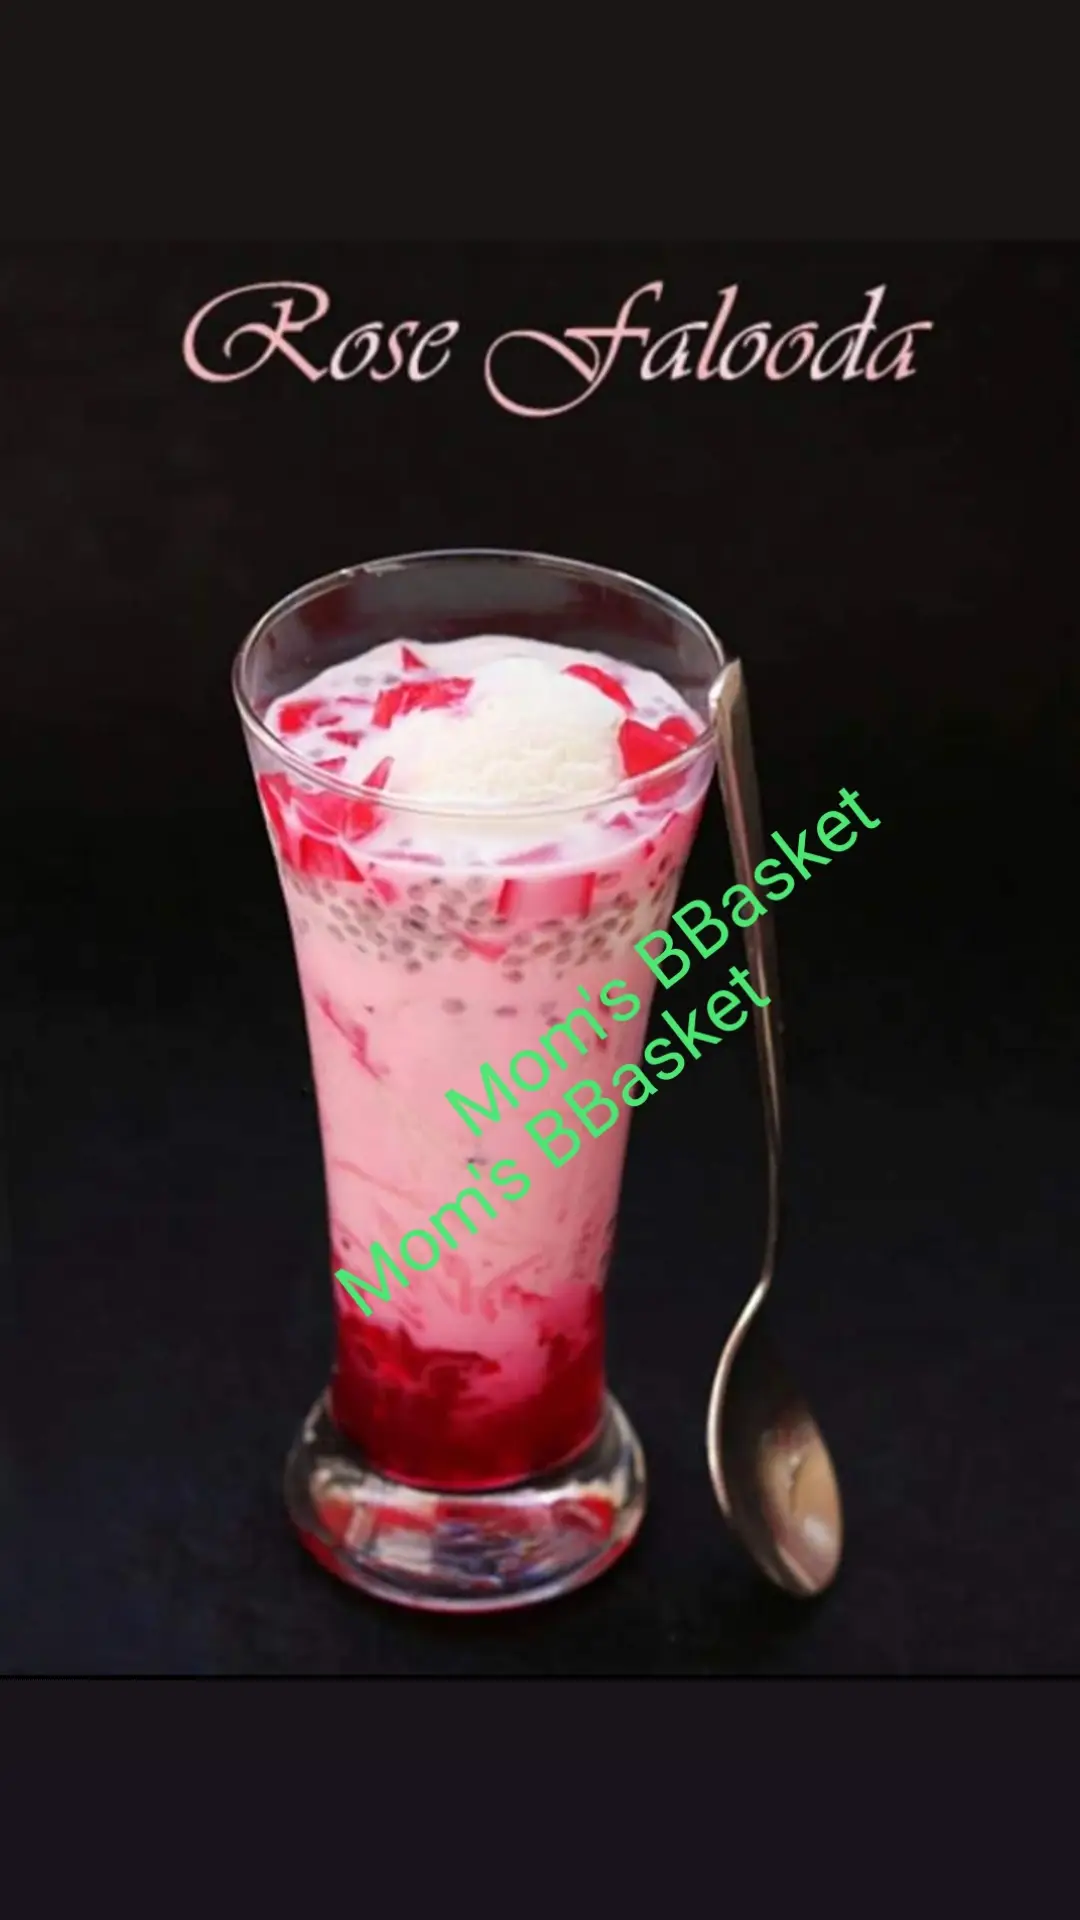 Mom's BBasket brings you the different flavours in falooda premix uploaded by Moms BBasket on 1/29/2022